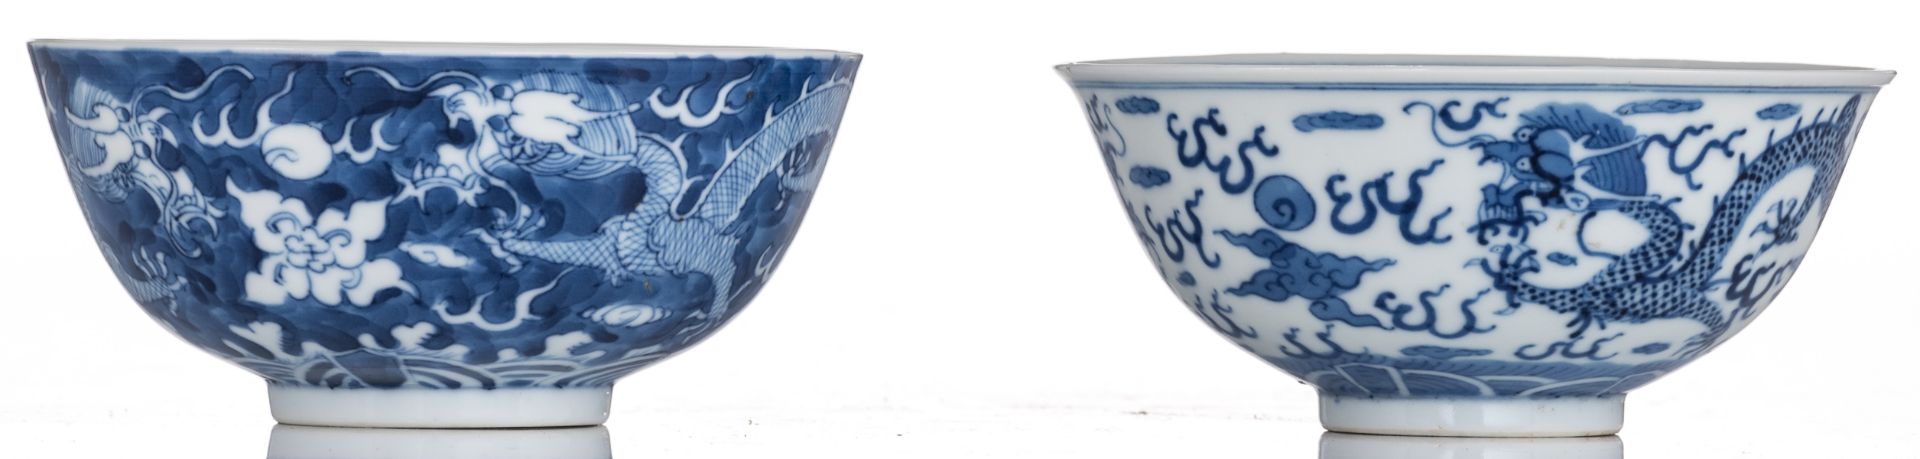 Two Chinese blue and white dragon decorated bowls, with a Kangxi mark, H 5,5 - 6 - ø 12,5 - 13 cm - Bild 2 aus 7